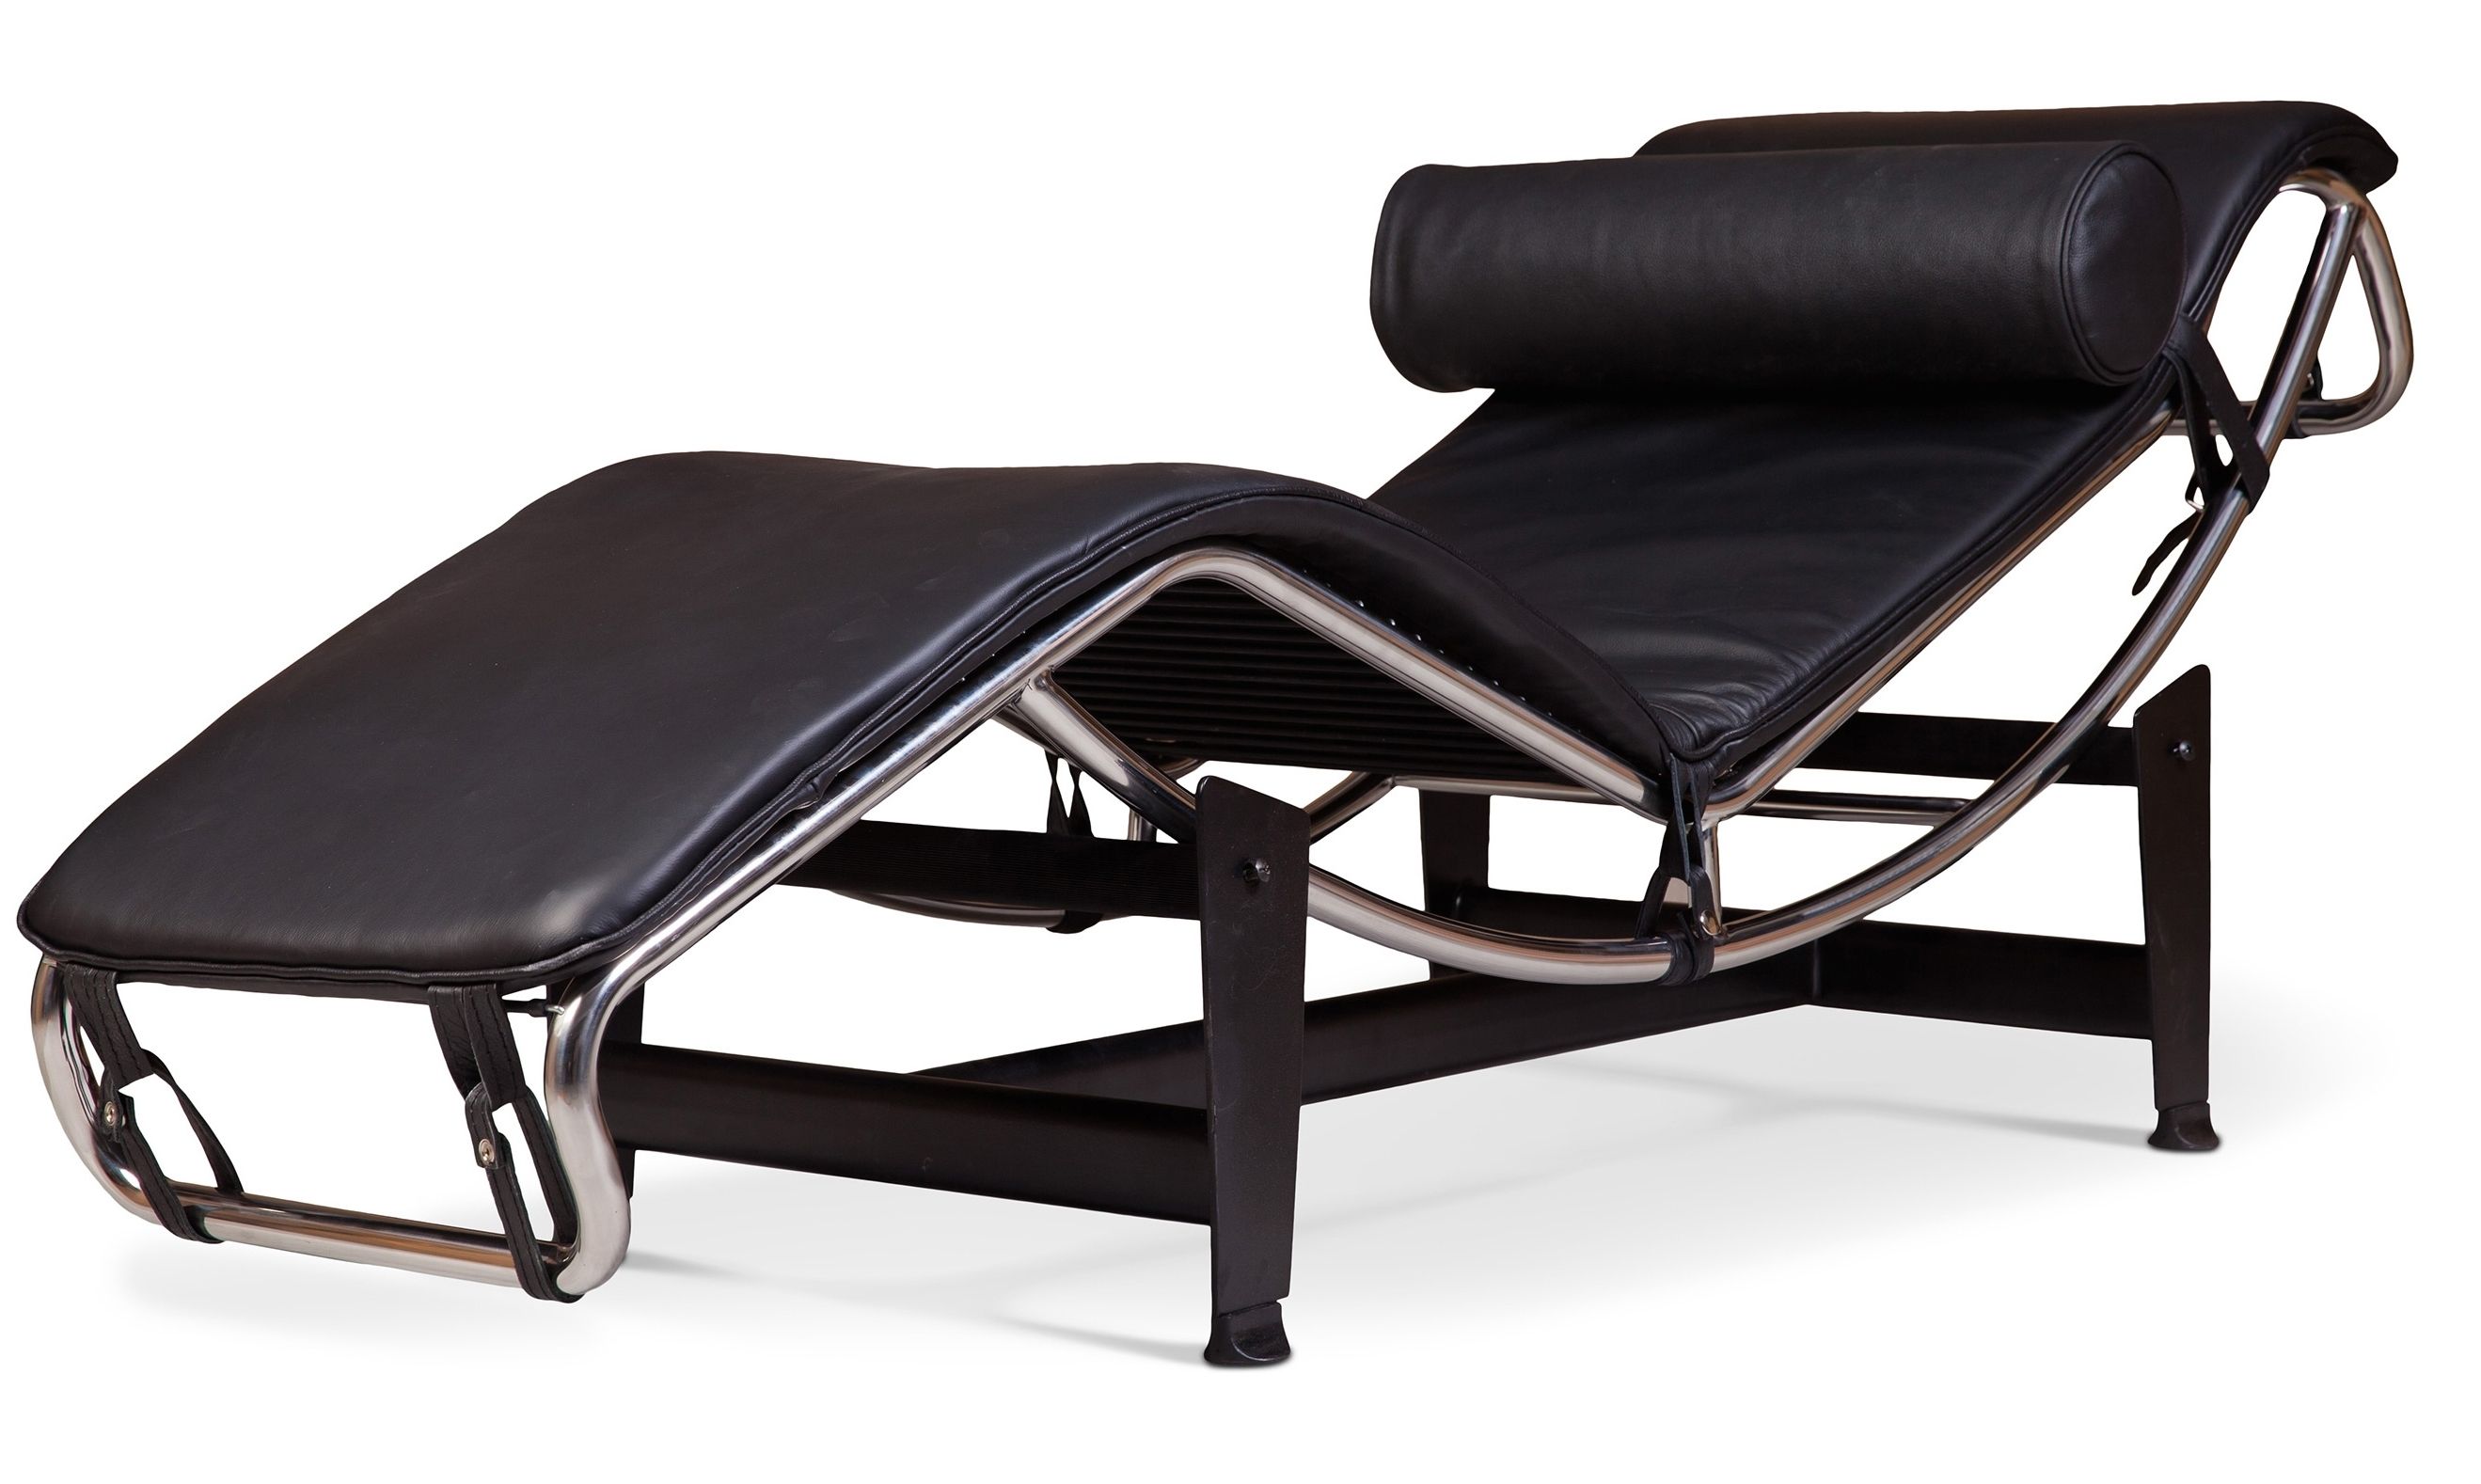 Corbusier Chaises Within Most Recent Chaise Longue Simili Noir Karly – Lestendances (View 11 of 15)